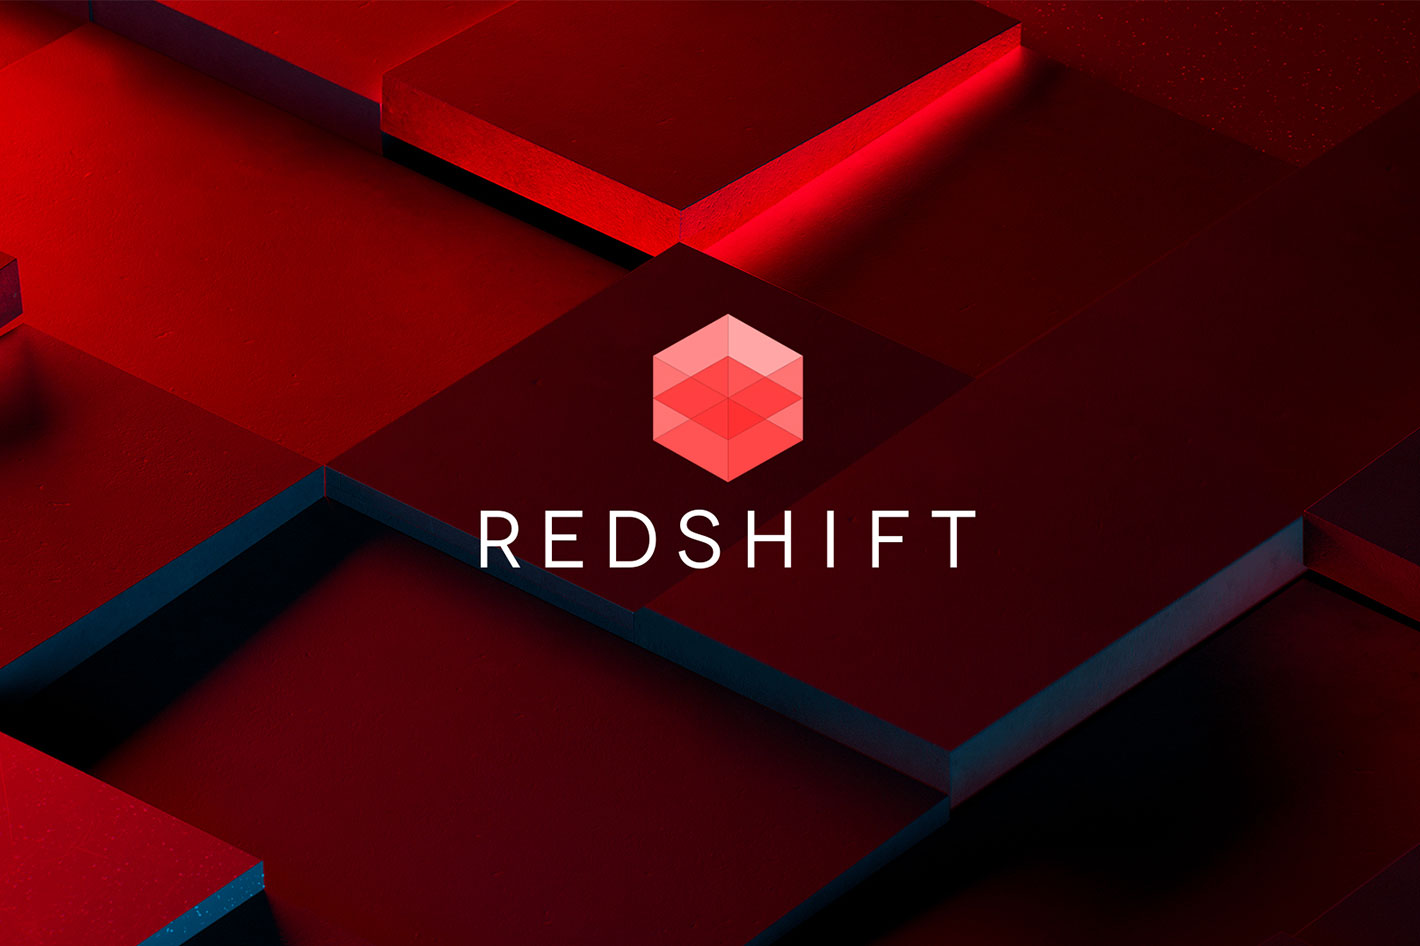 Maxon’s Redshift now available as subscription